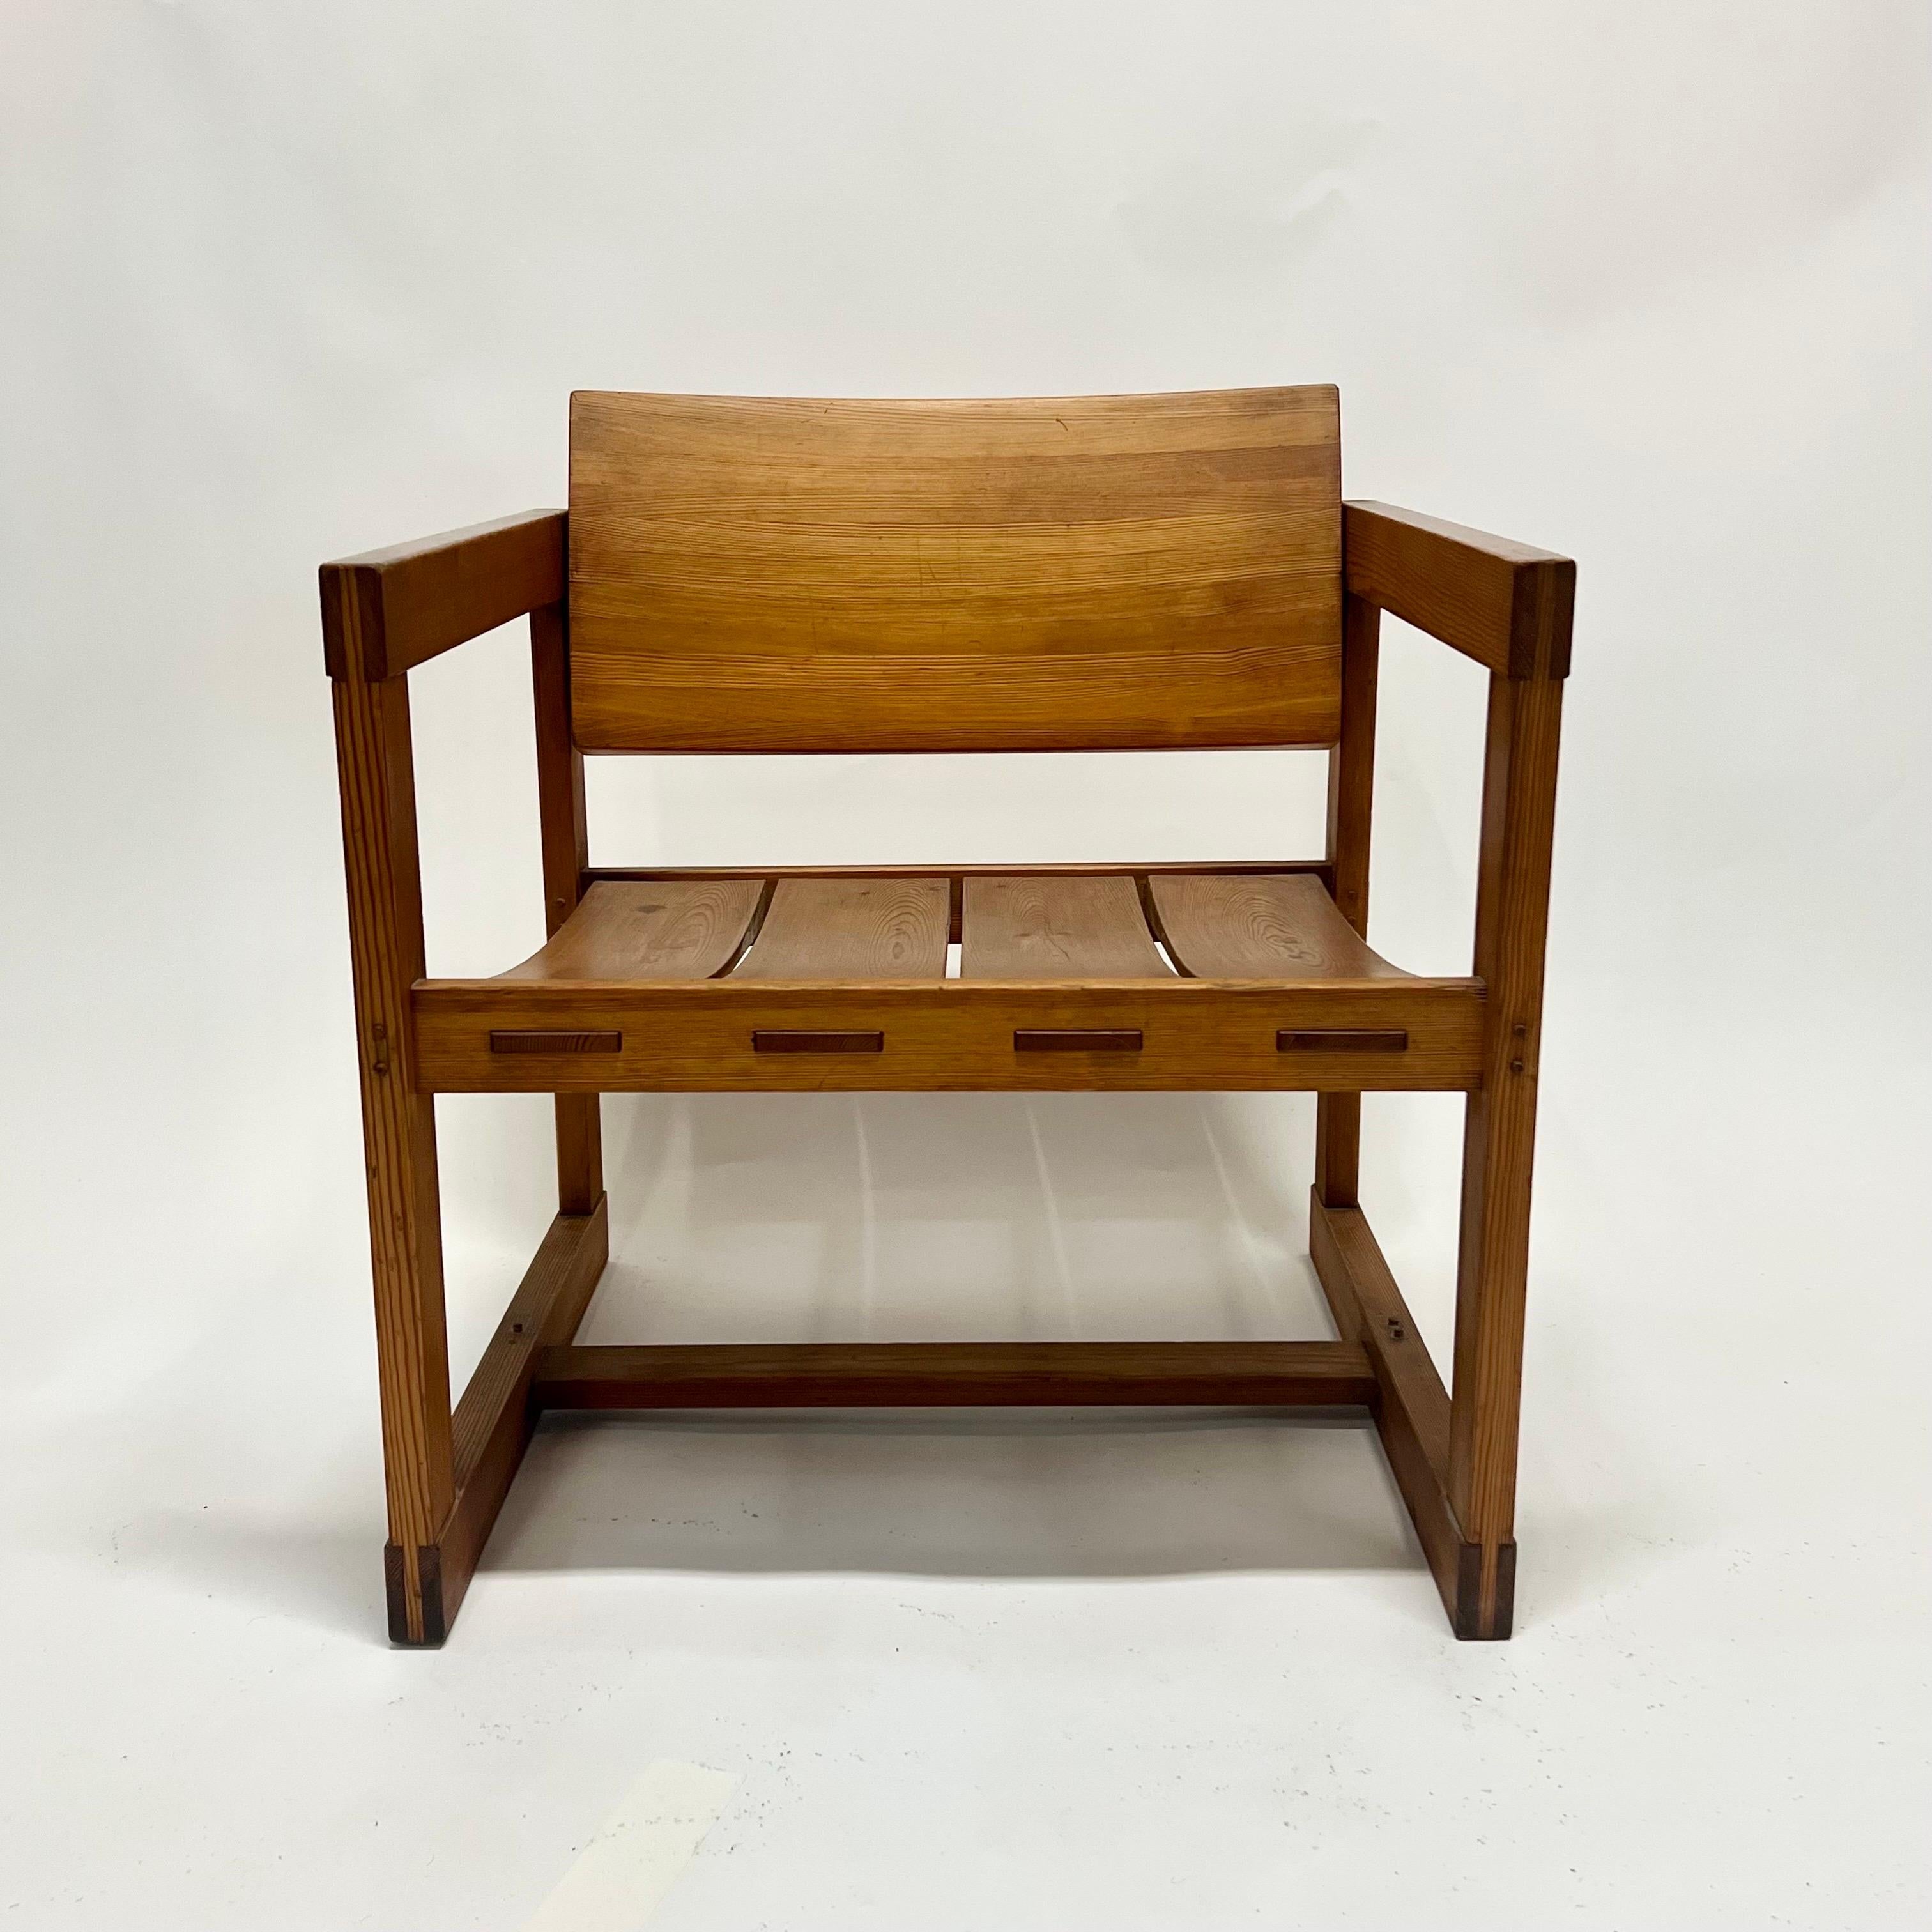 Fantastic all wood lounge chair designed by Edvin Helseth circa 1960s, Norway. The chair is made of a certain kind of Pine which is the equivalent of the US old growth Douglas Fir. No metal hardware on this chair, it made of all wood. The seat back